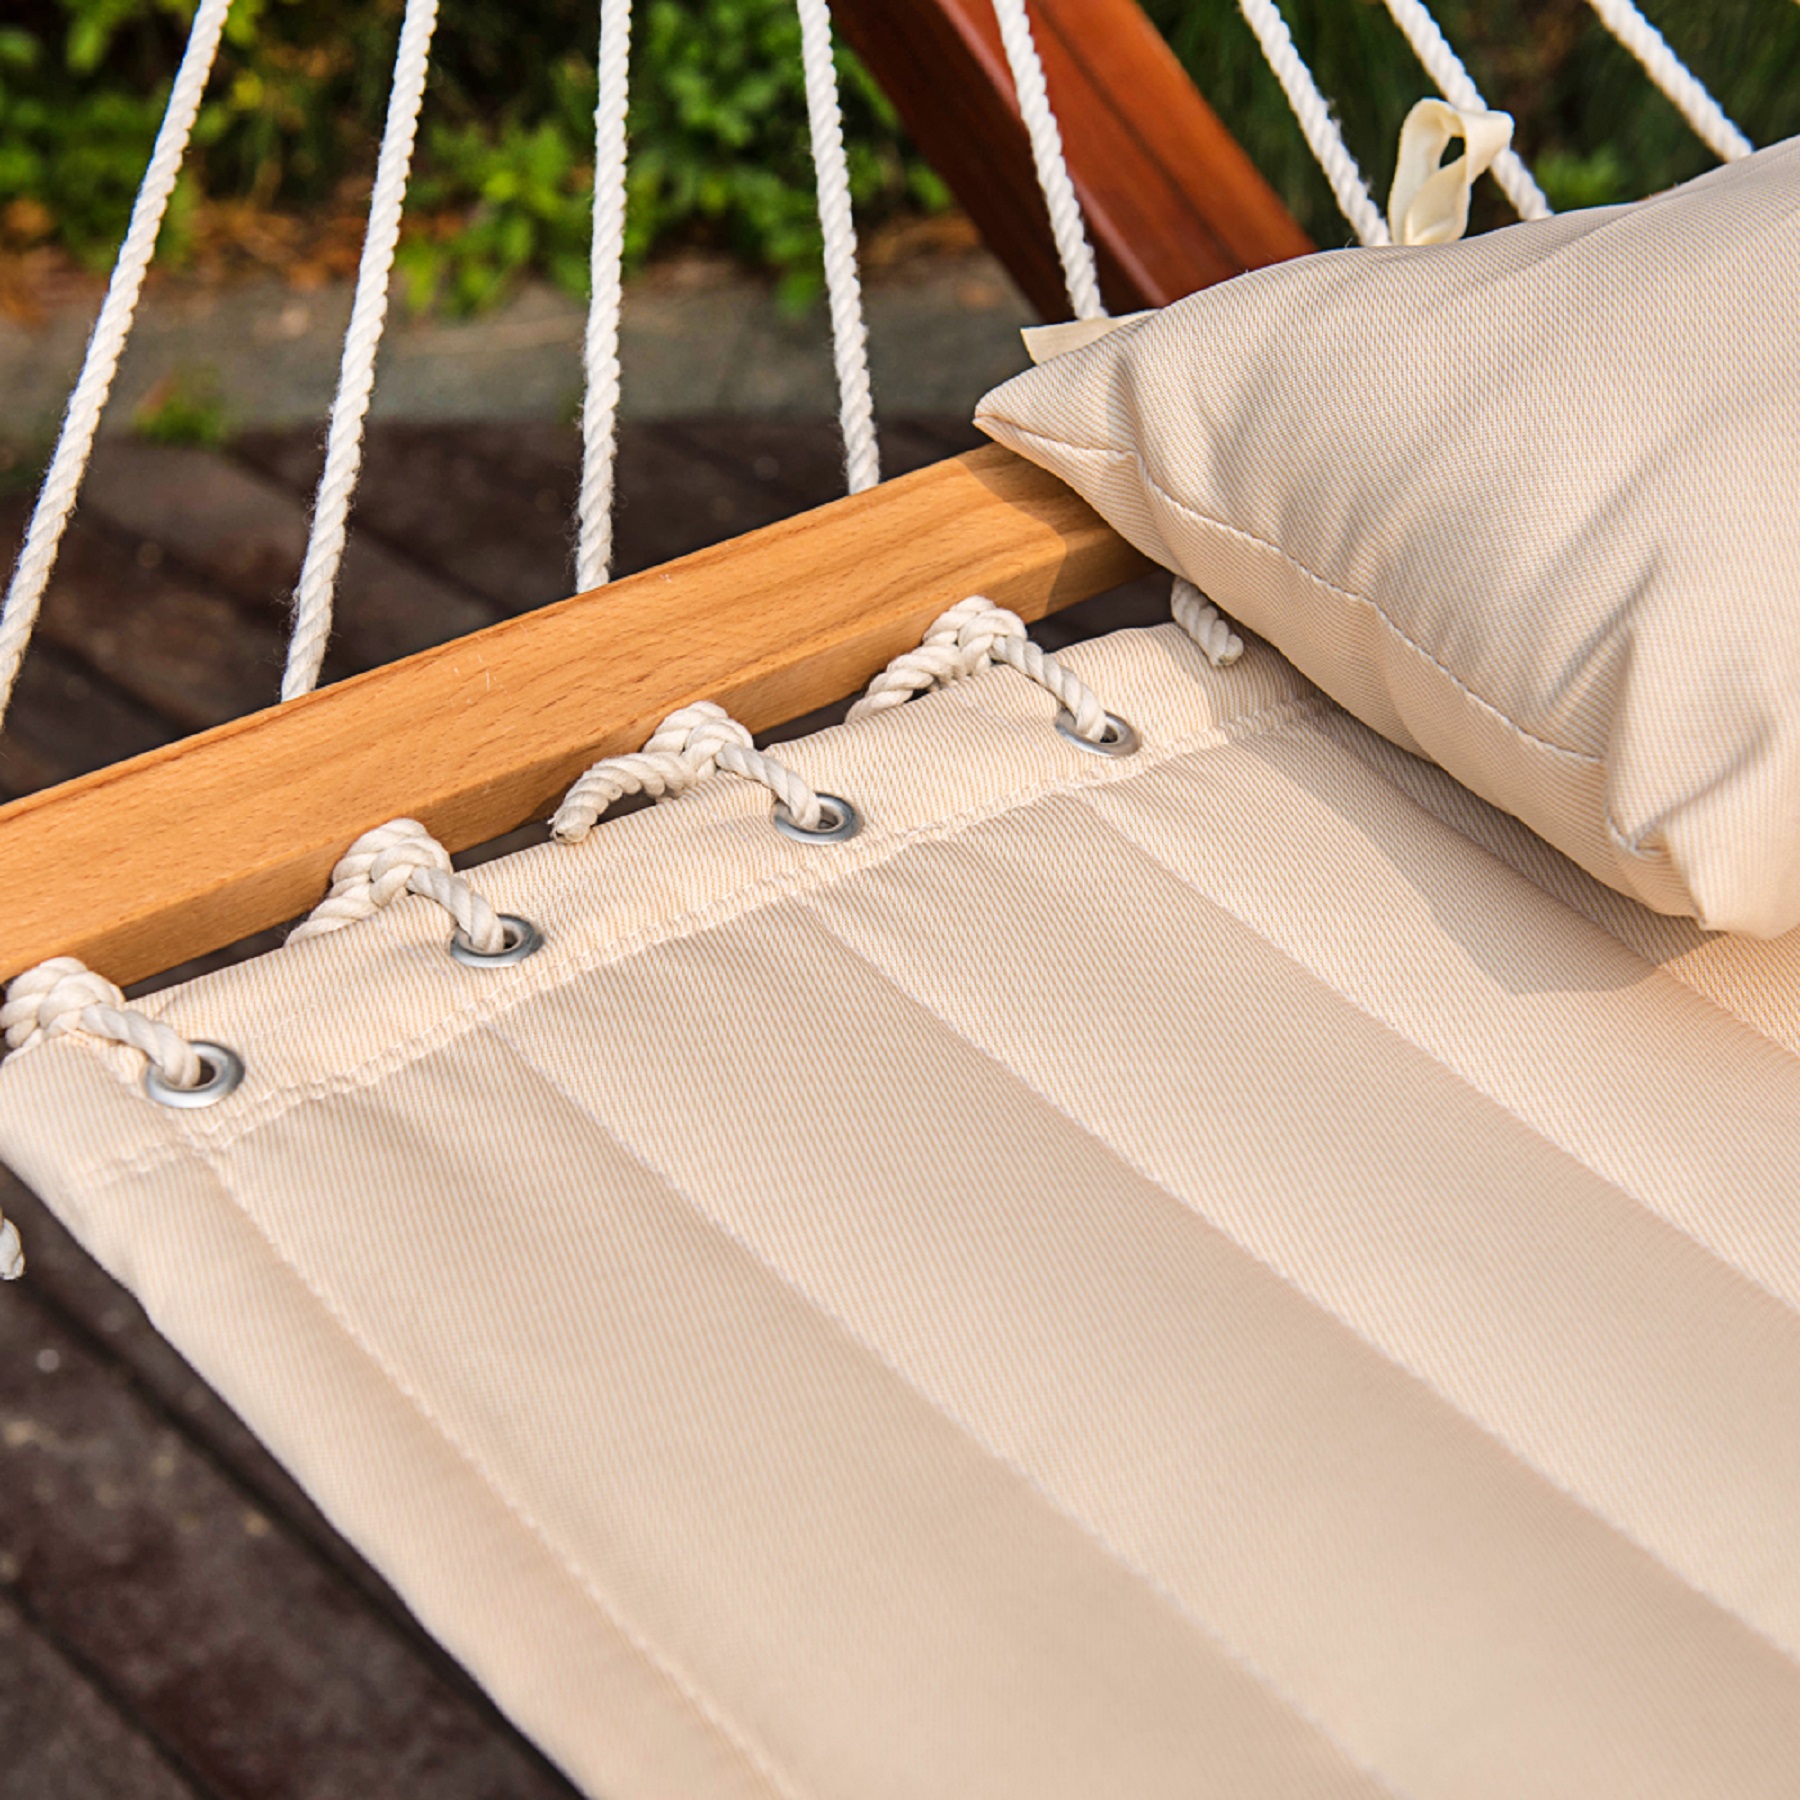 Double Quilted Cotton Fabric Swing Hammock with Pillow Beige 450 lbs Capacity without Stand - image 5 of 8